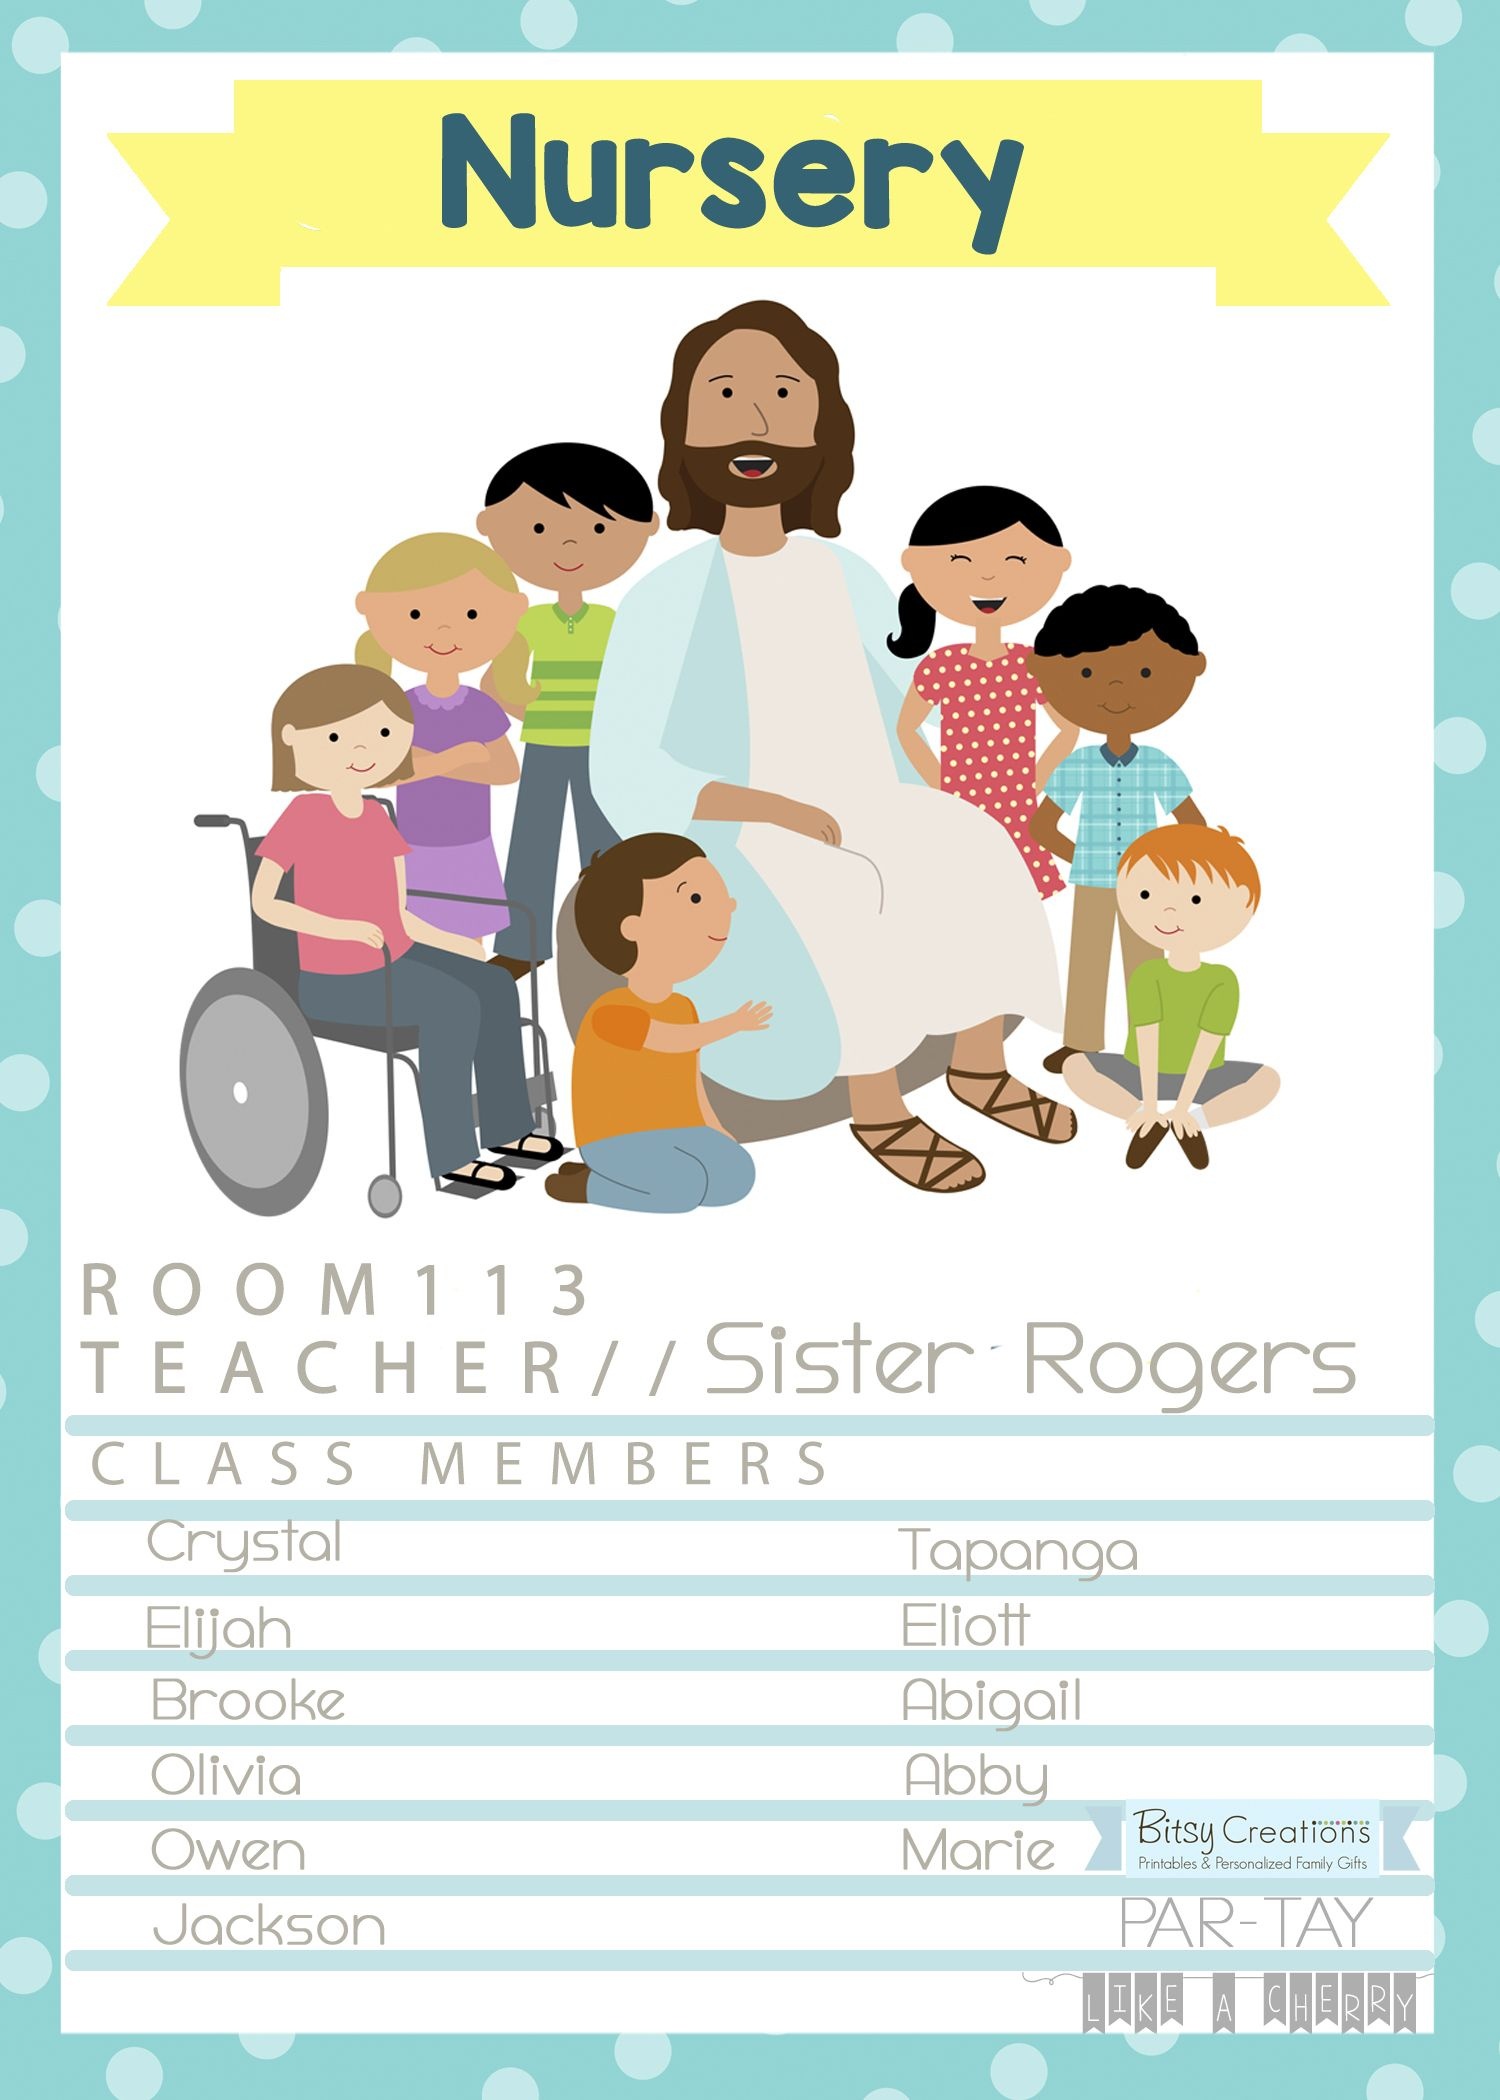 Primary 2019 Door Signs | Party Like A Cherry | Door Signs, Lds - Free Printable Nursery Resources